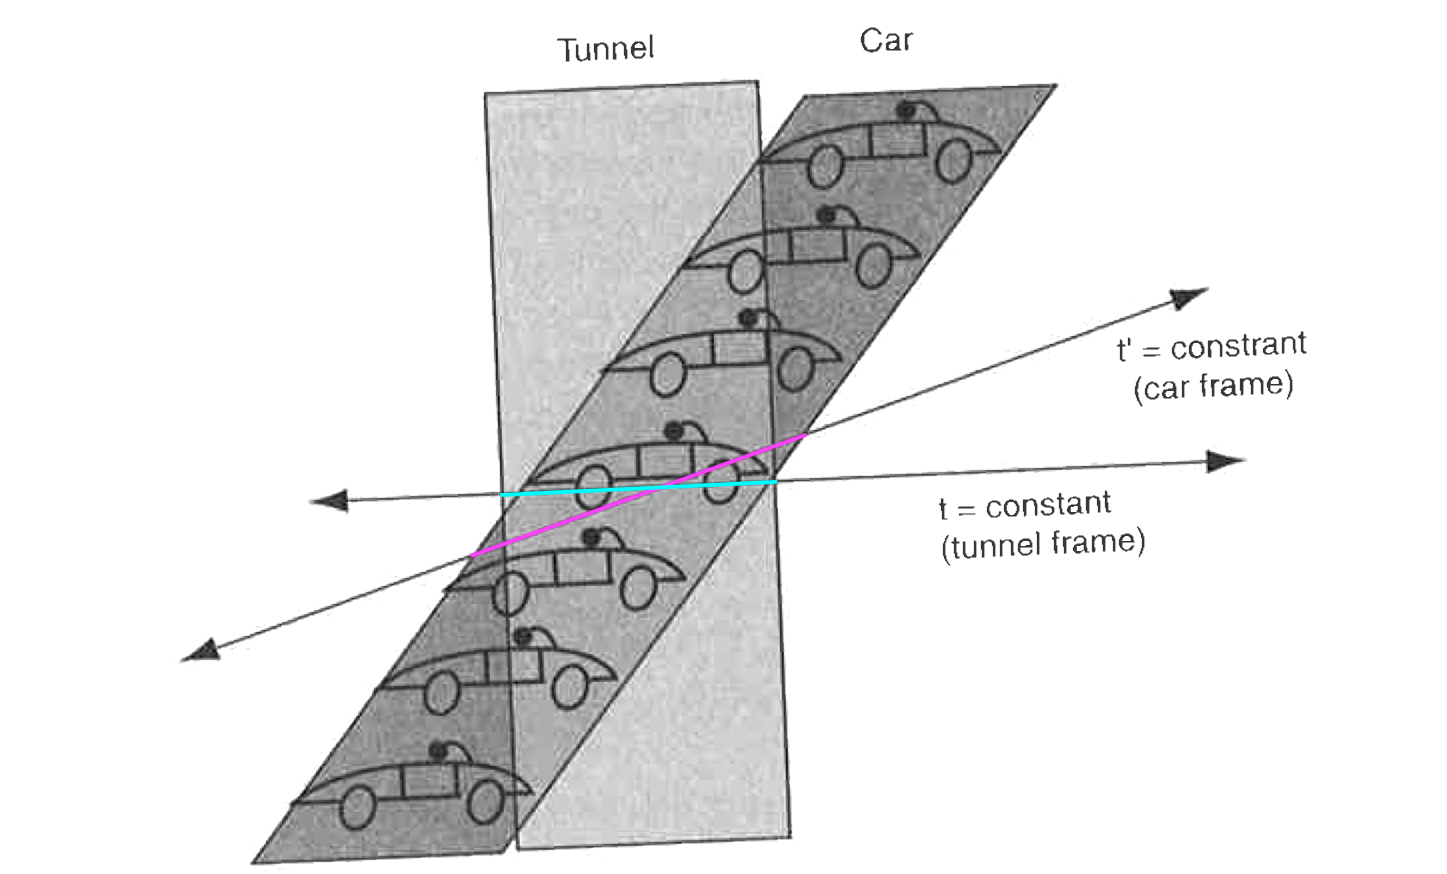 Length contraction: the car is longer than the tunnel in the Car frame (pink span), and shorter in the Tunnel frame (blue span) (Maudlin 2011: 54).